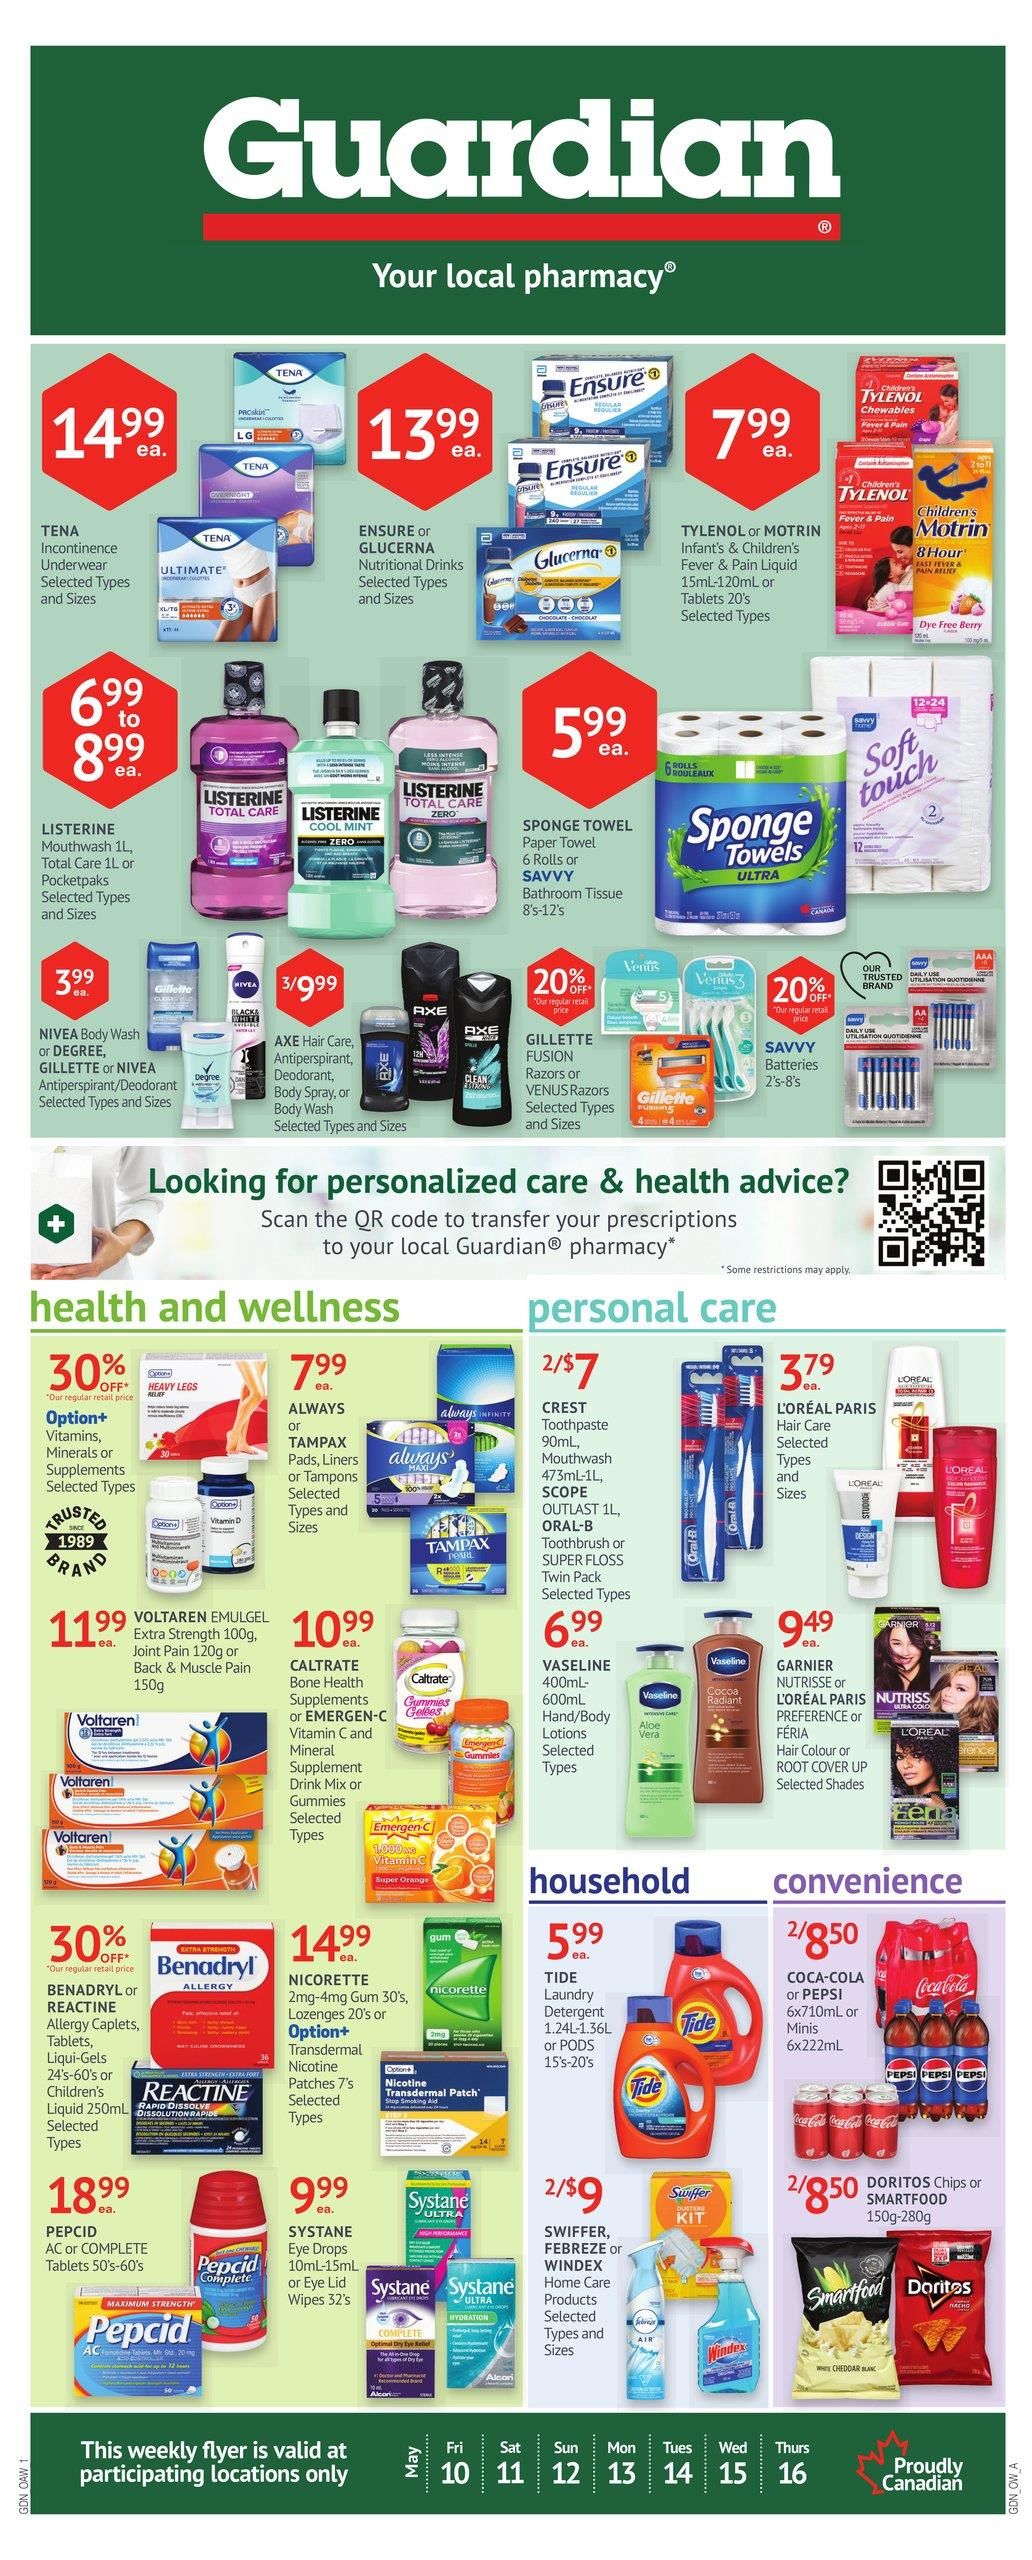 Guardian Pharmacy - Weekly Flyer Specials